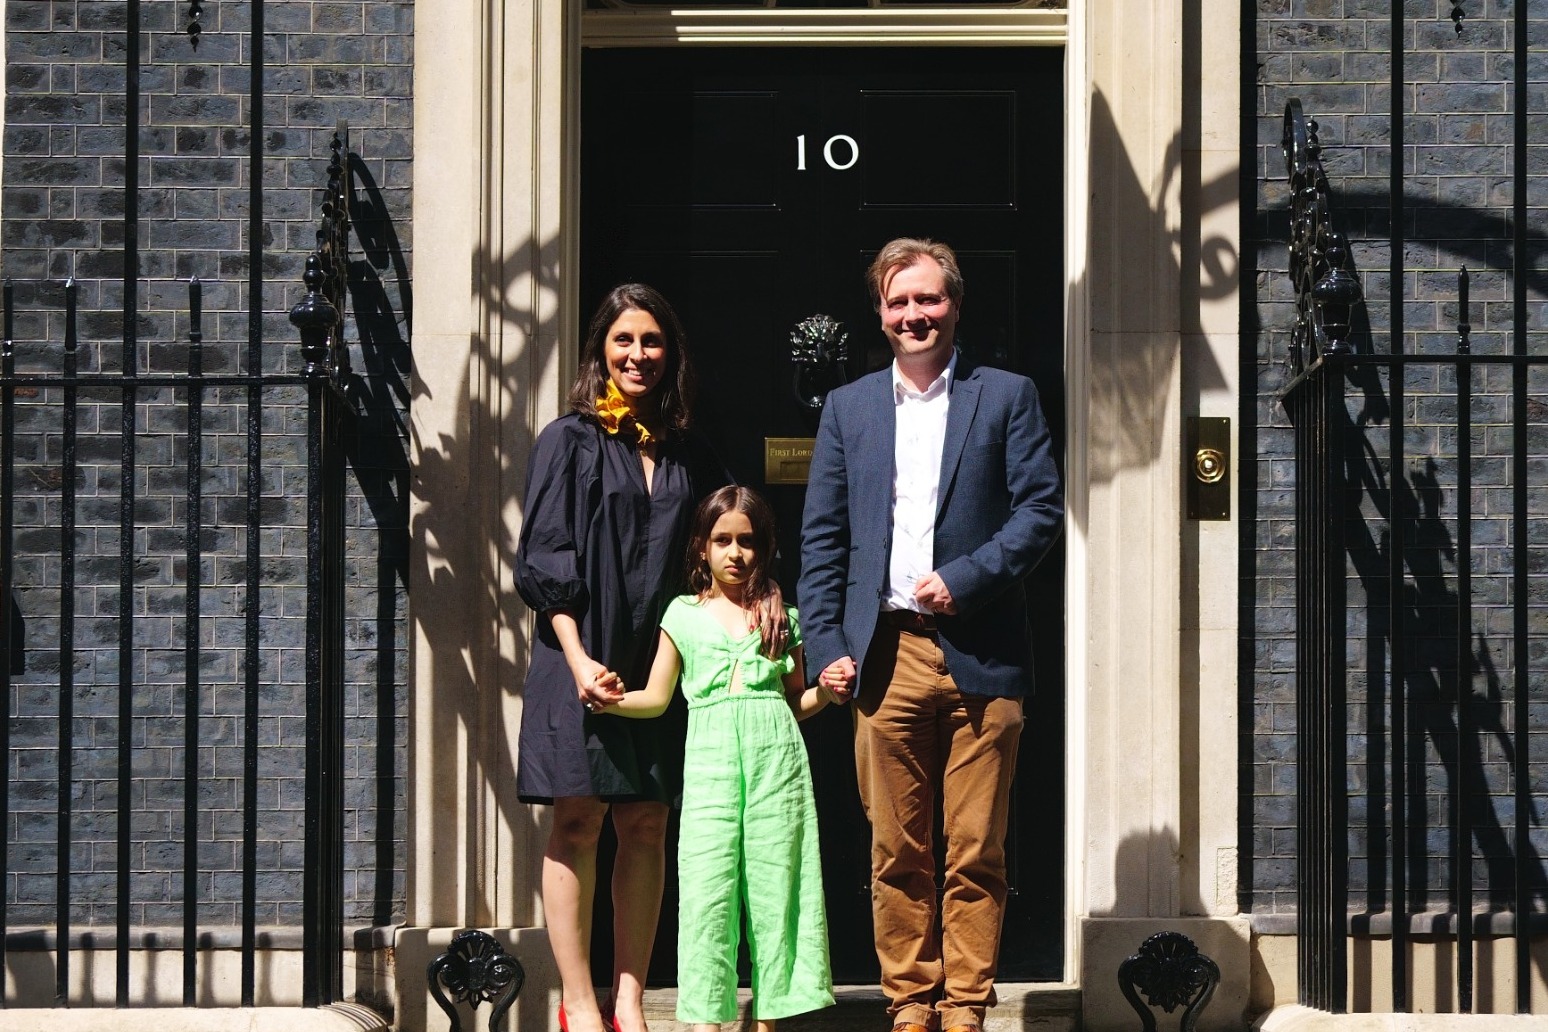 PM does not apologise after Nazanin tells him she lived in ‘shadow of his words’ 